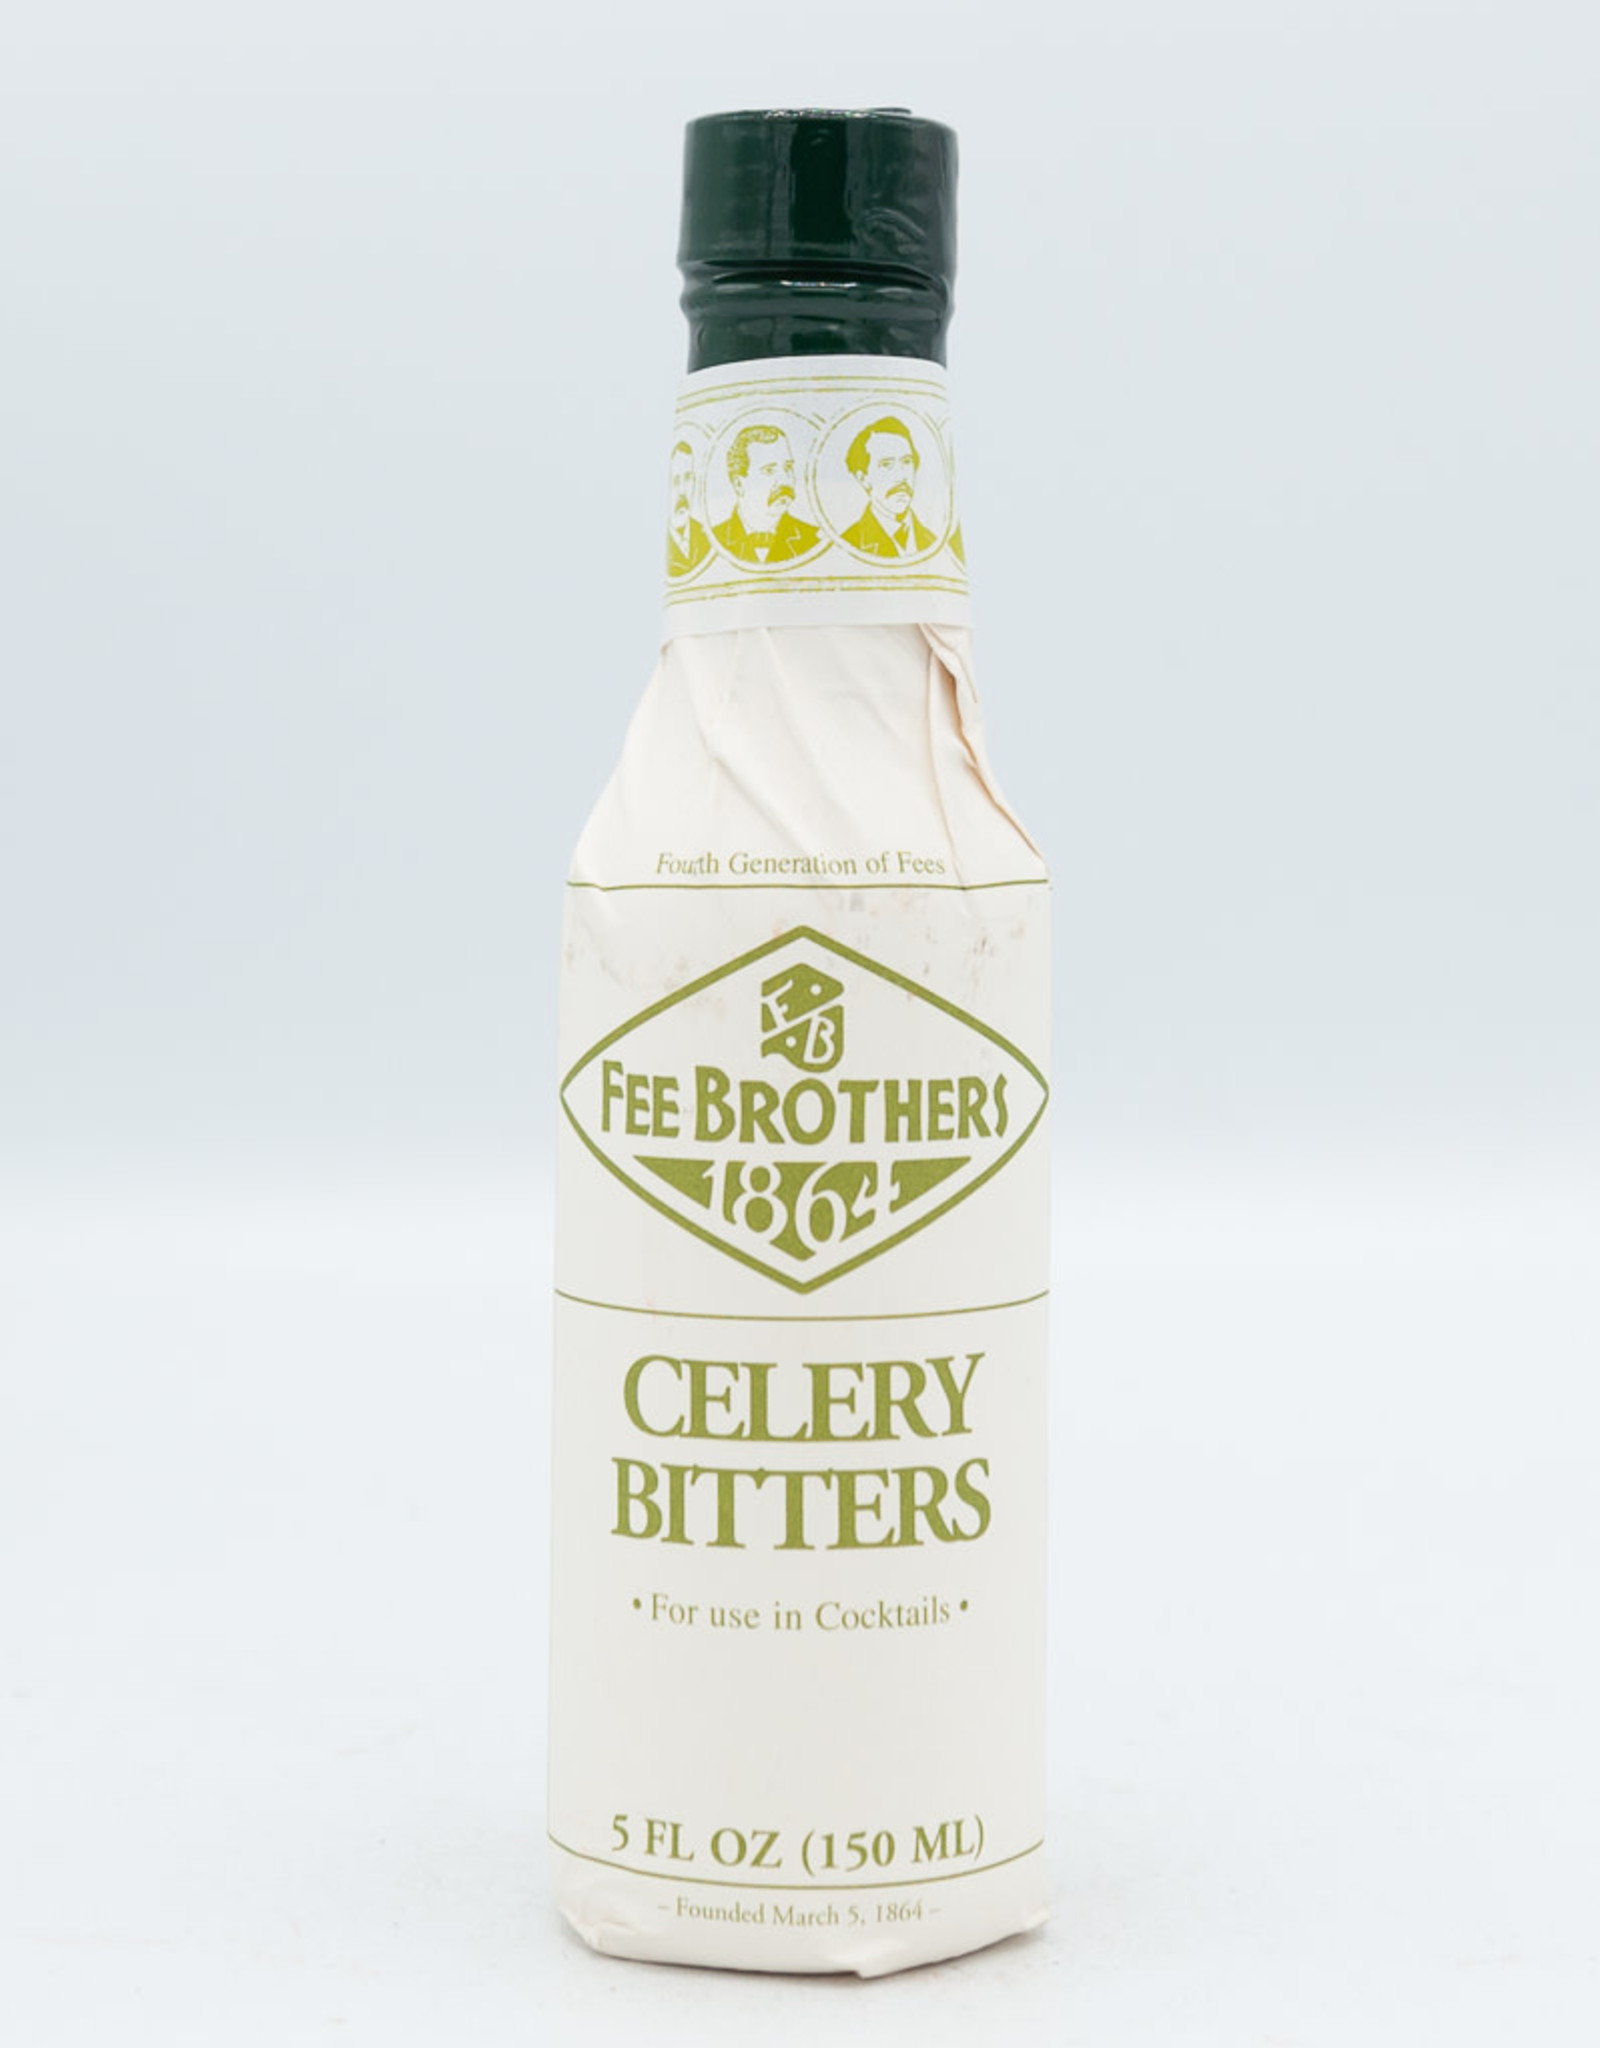 Fee Brothers Fee Brothers Celery Bitters